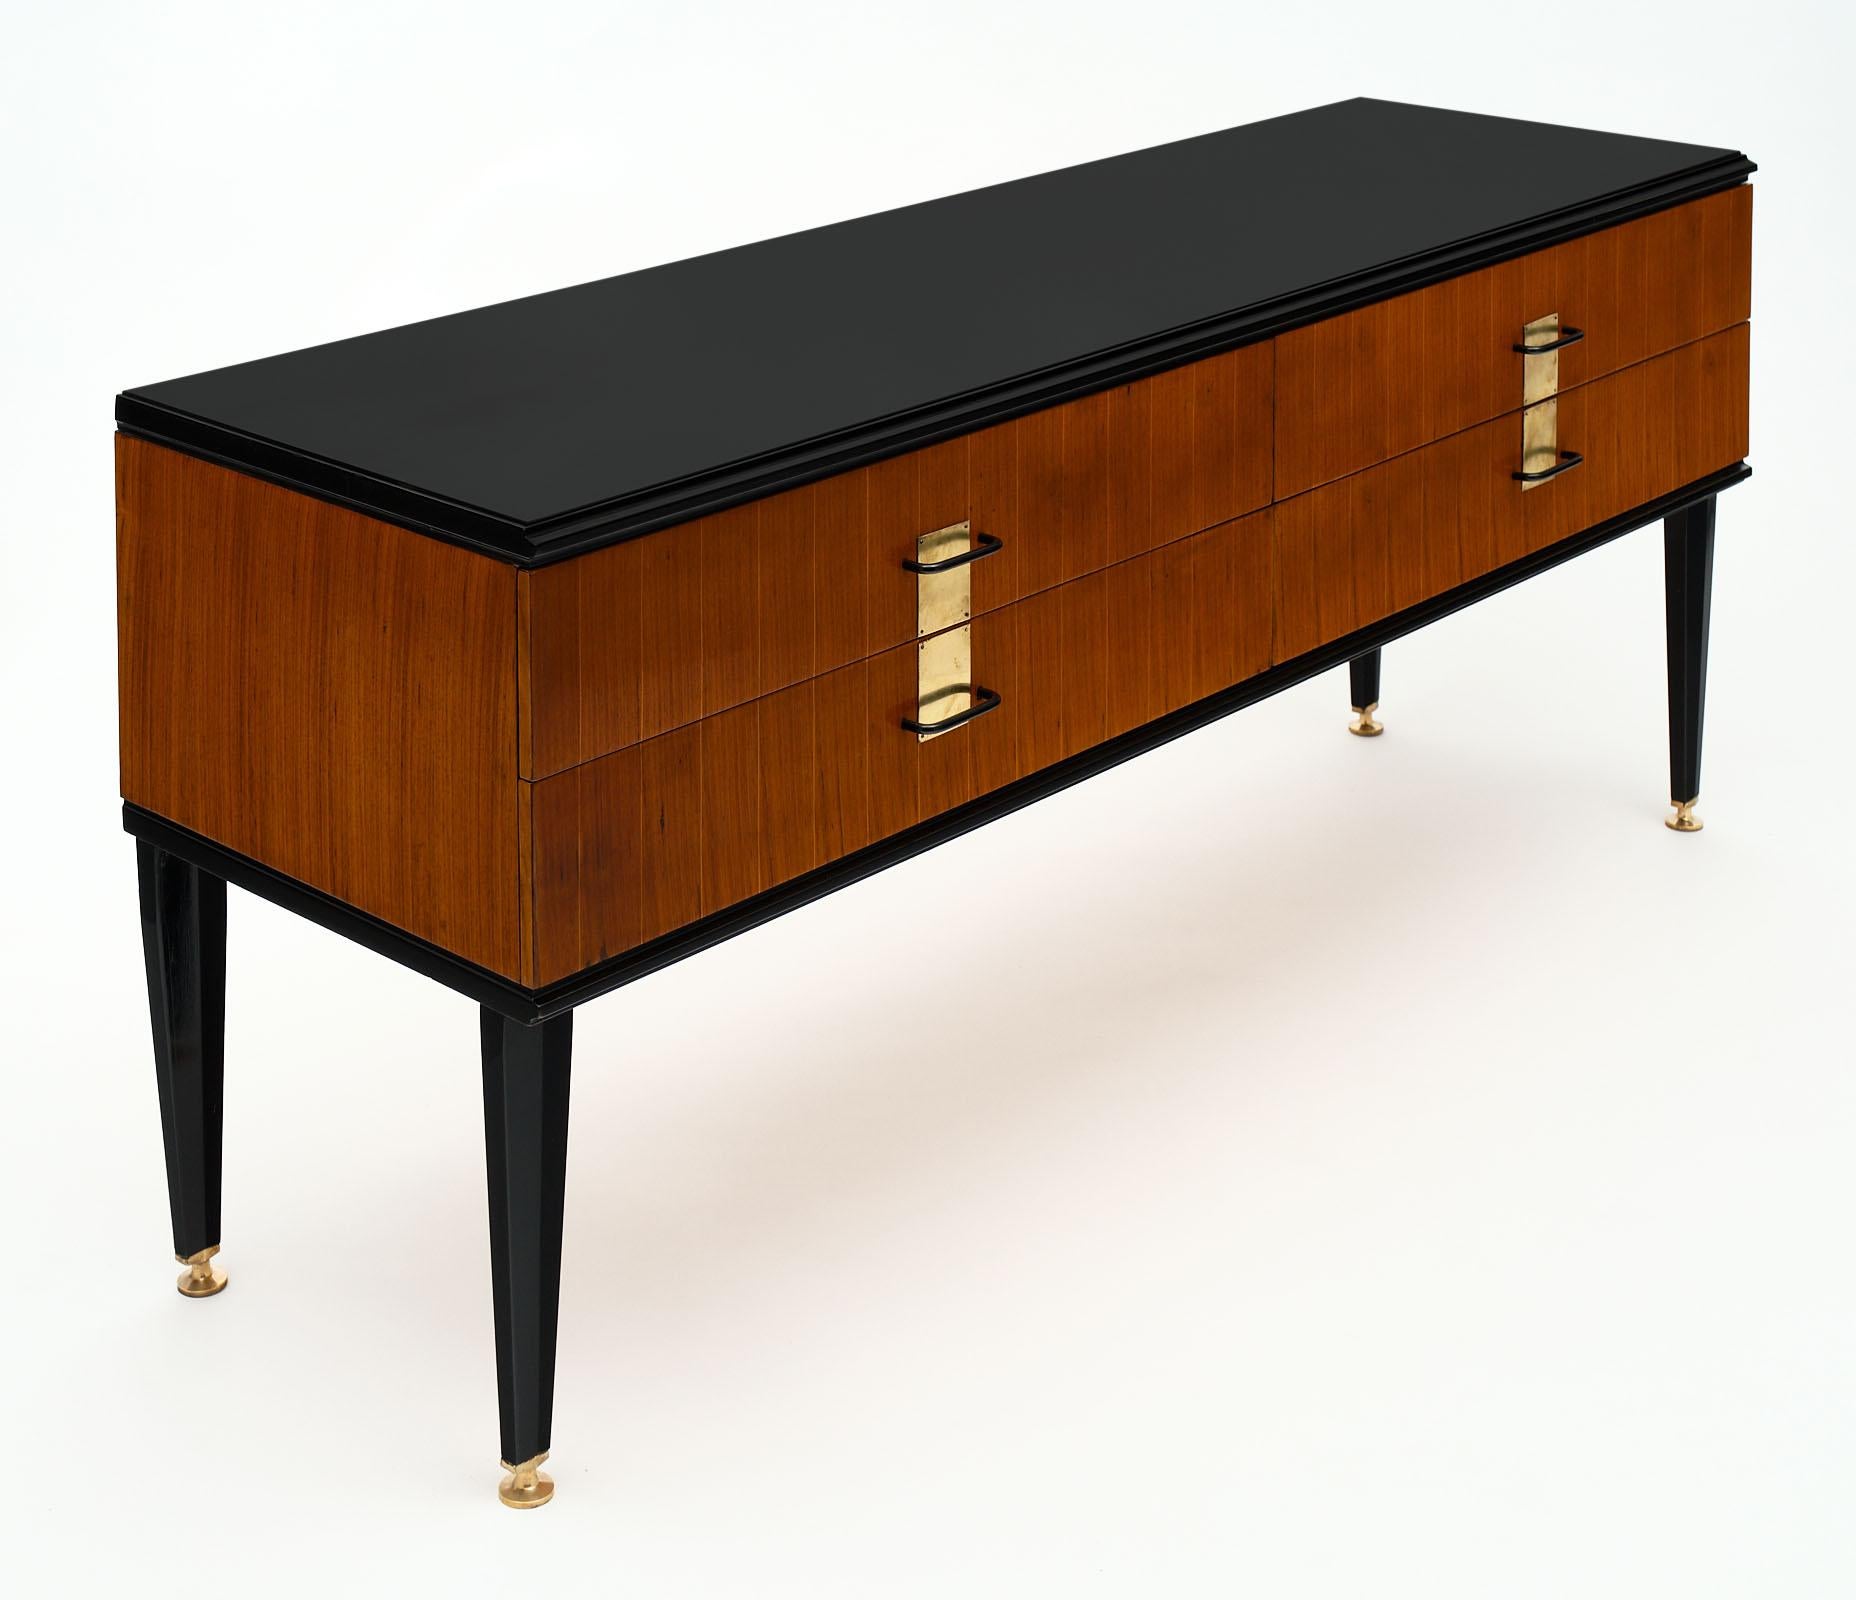 French modernist chest in the manner of Jacques Adnet. Made of rosewood and ebonized rosewood; this piece features brass hardware and beautiful tapered legs with bronze feet. It is in excellent vintage condition!